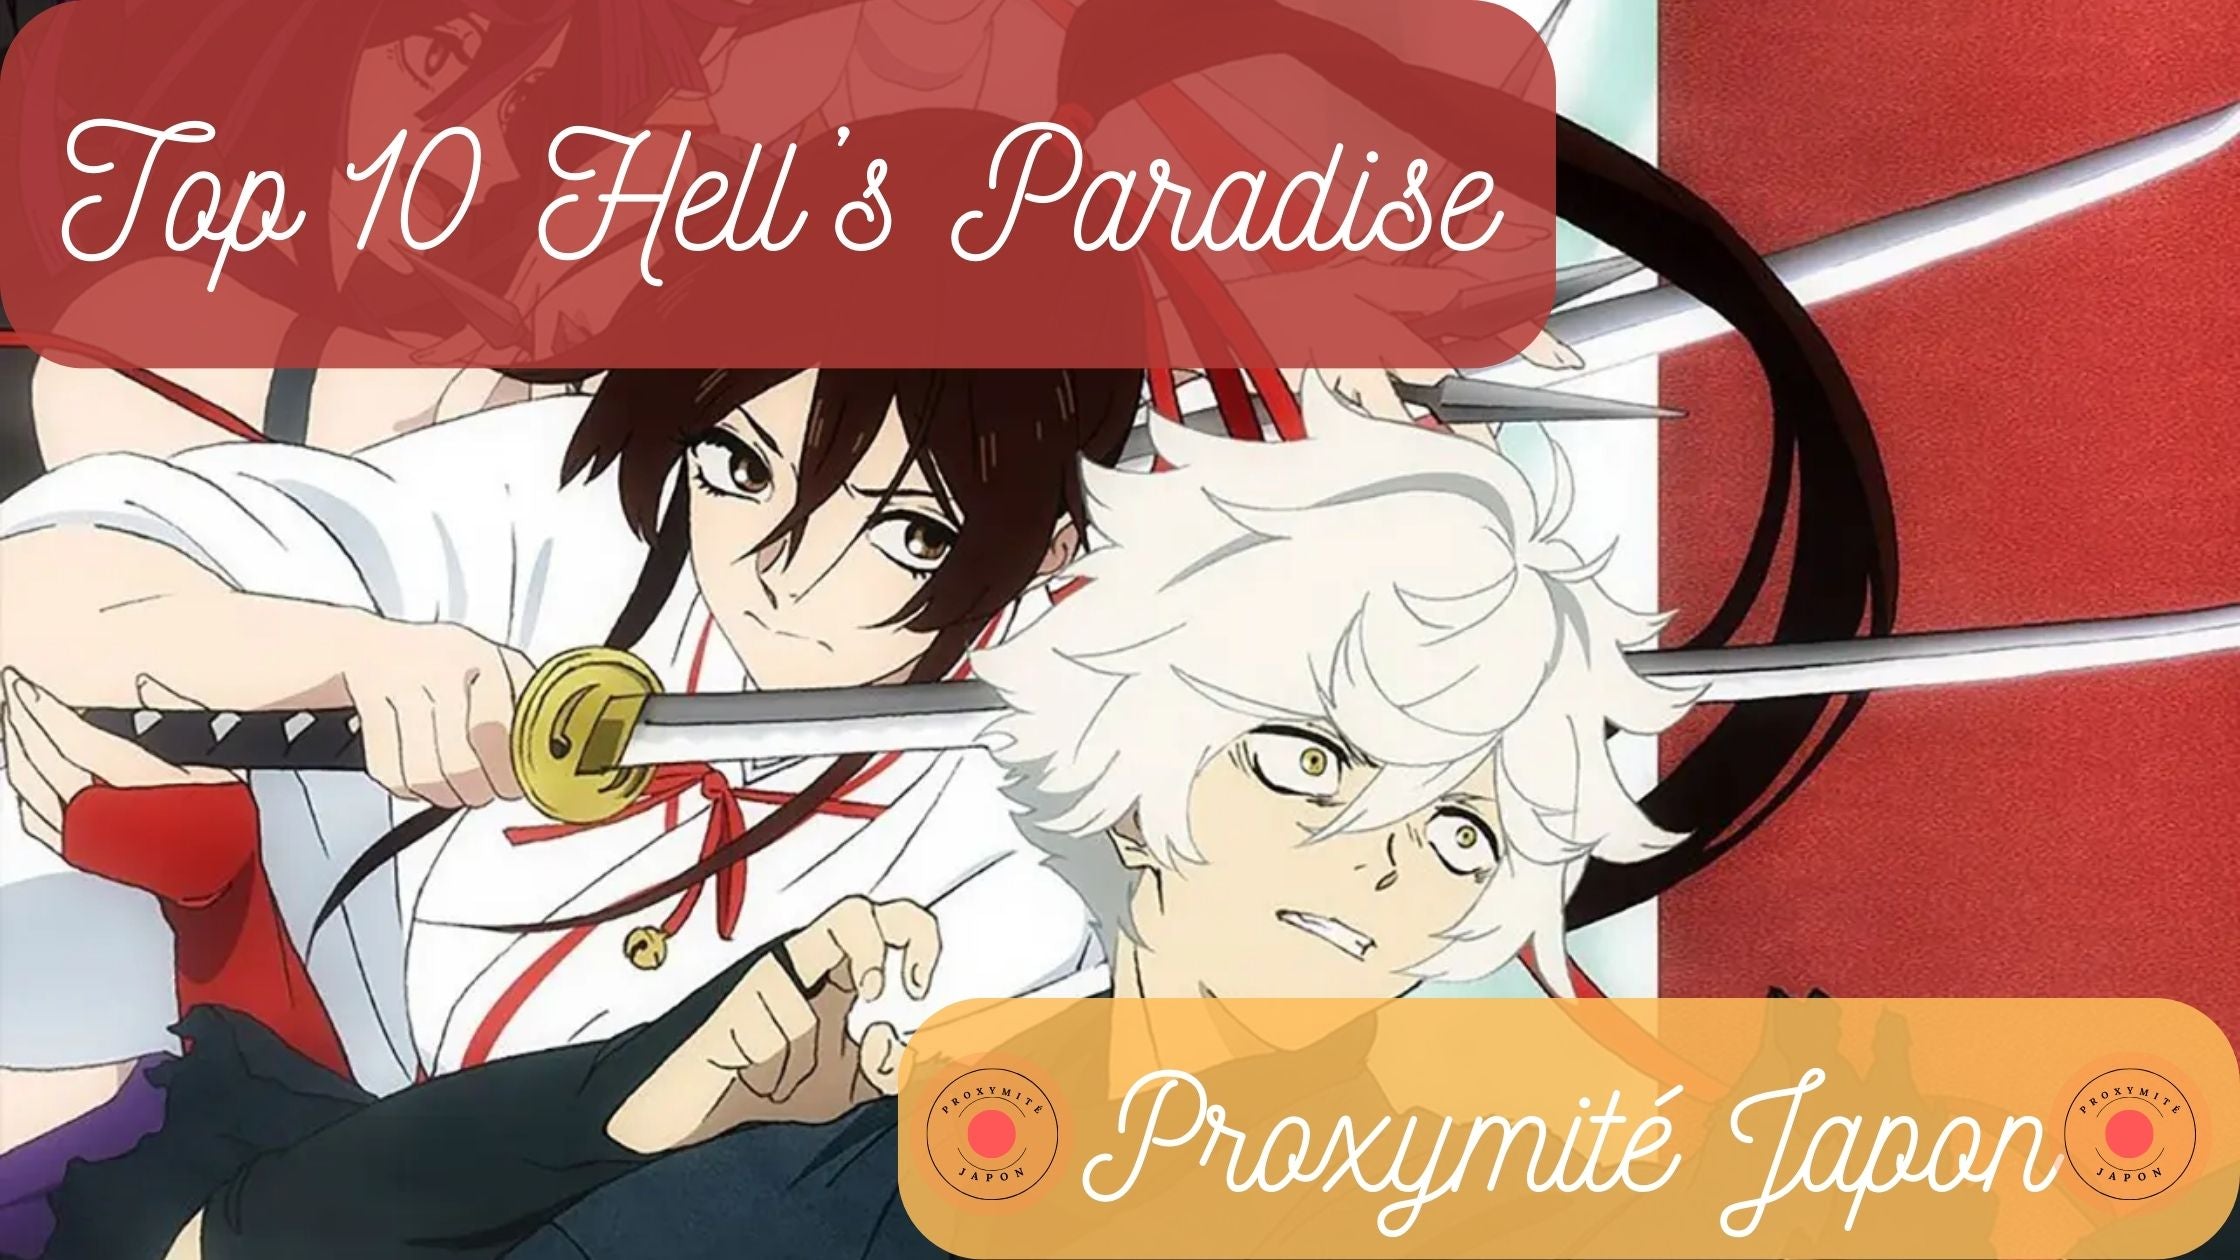 Hell's Paradise: 10 personagens mais fortes, classificados - Play Trucos